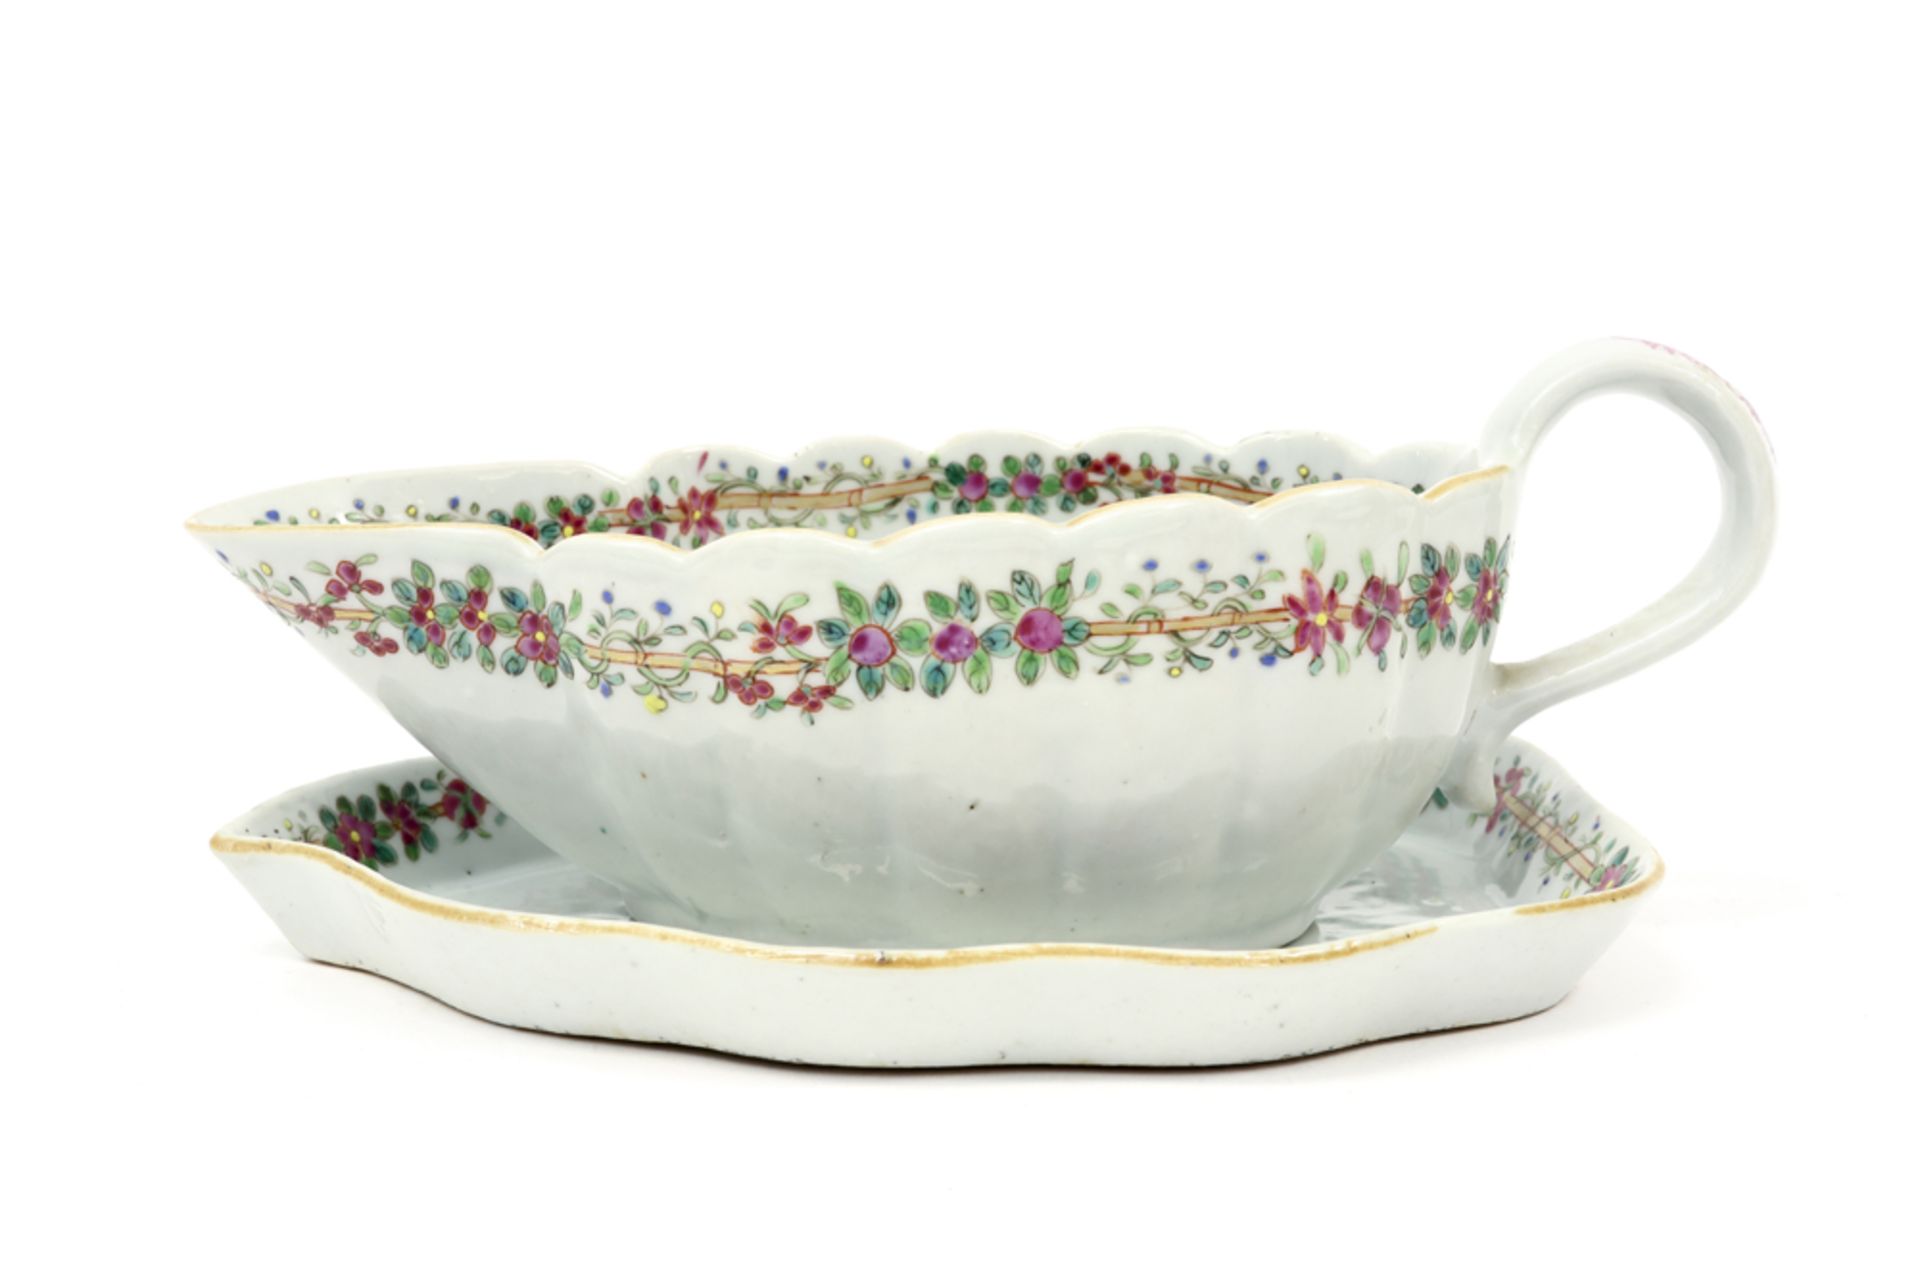 18th Cent. Chinese sauce boat with its matching dish in porcelain with 'Famille Rose' decor || - Image 2 of 4